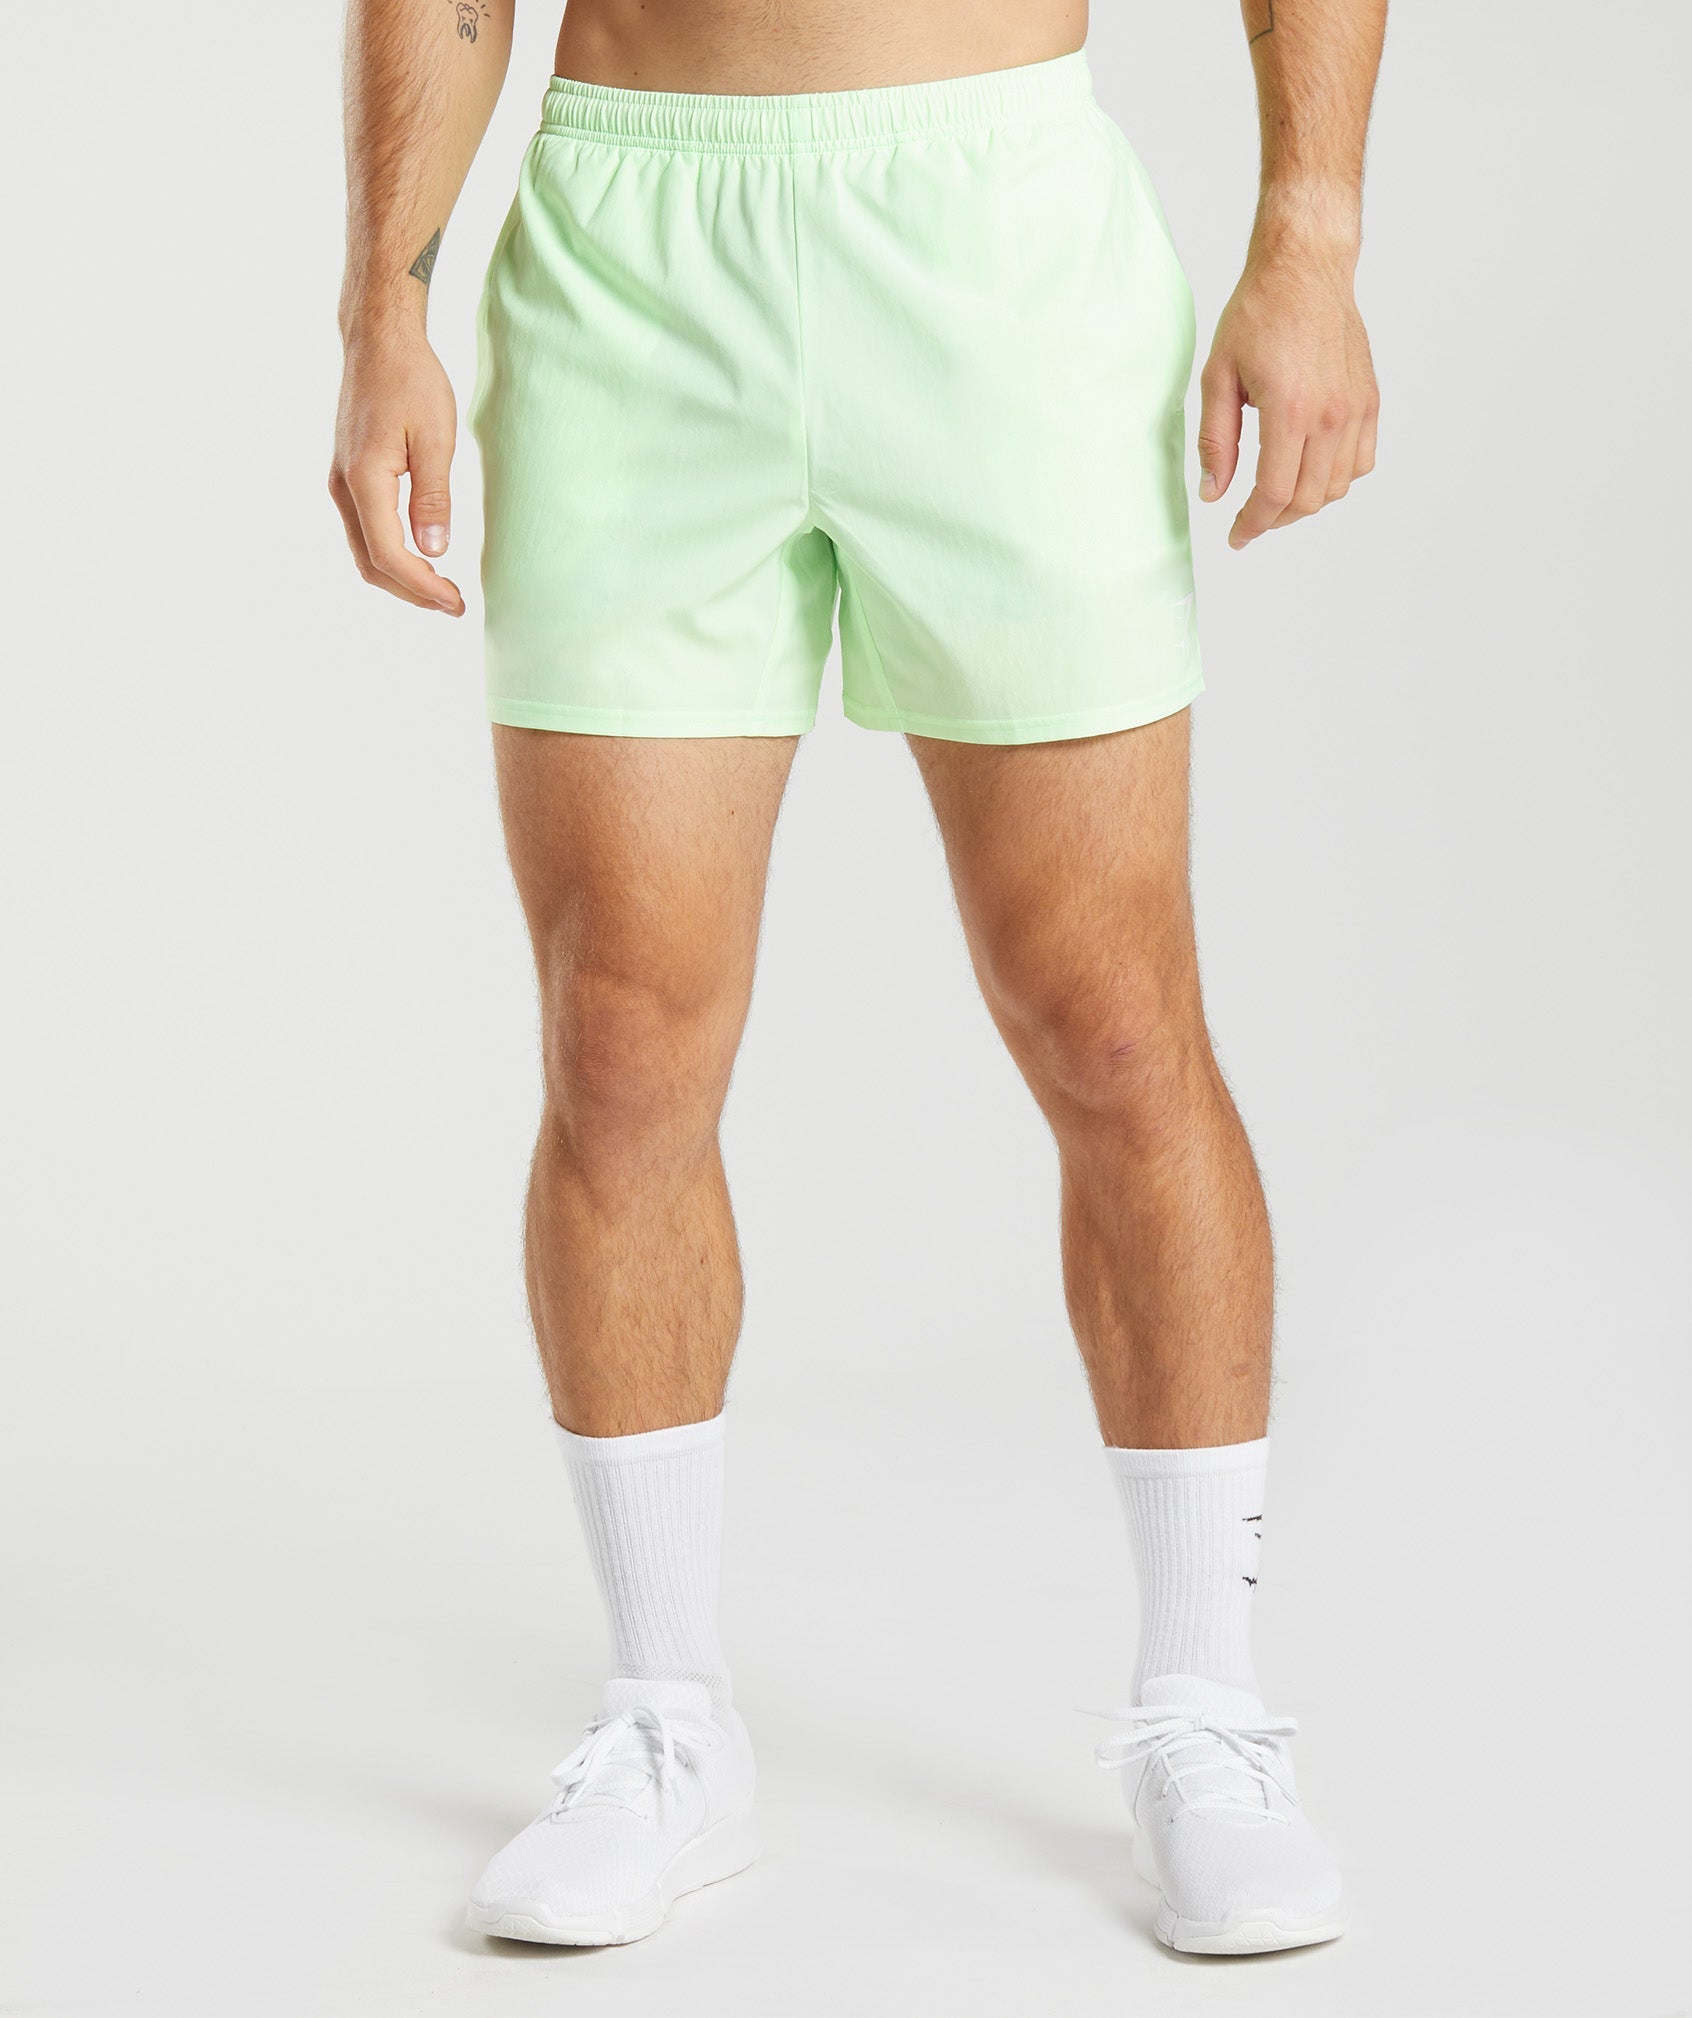 Arrival 5" Shorts in Fluo Mint